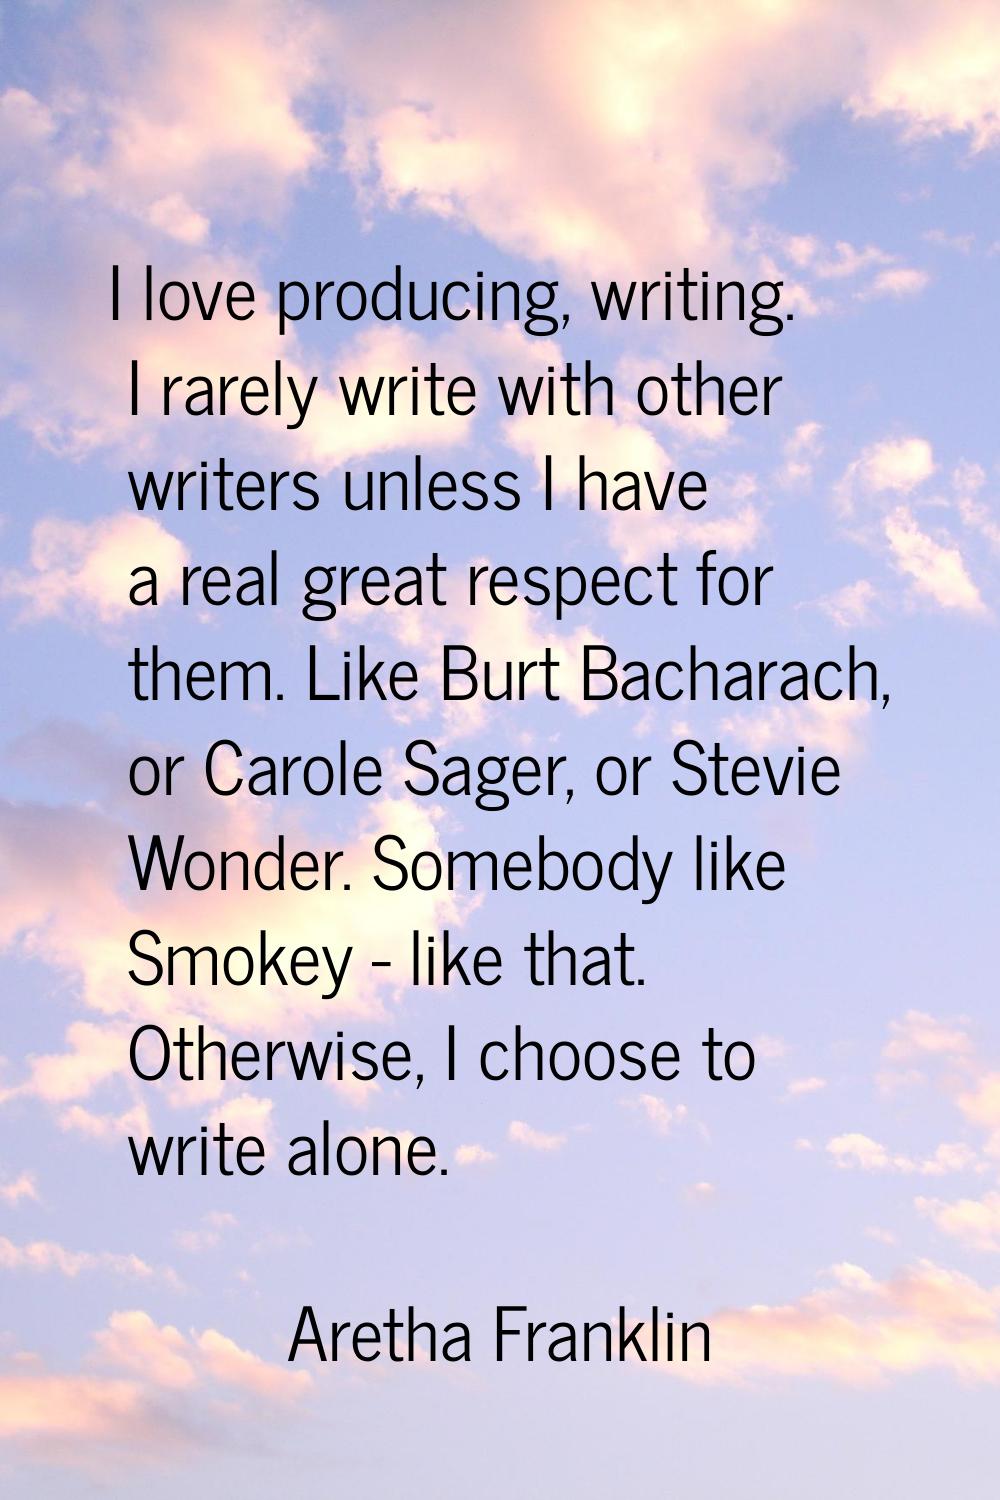 I love producing, writing. I rarely write with other writers unless I have a real great respect for